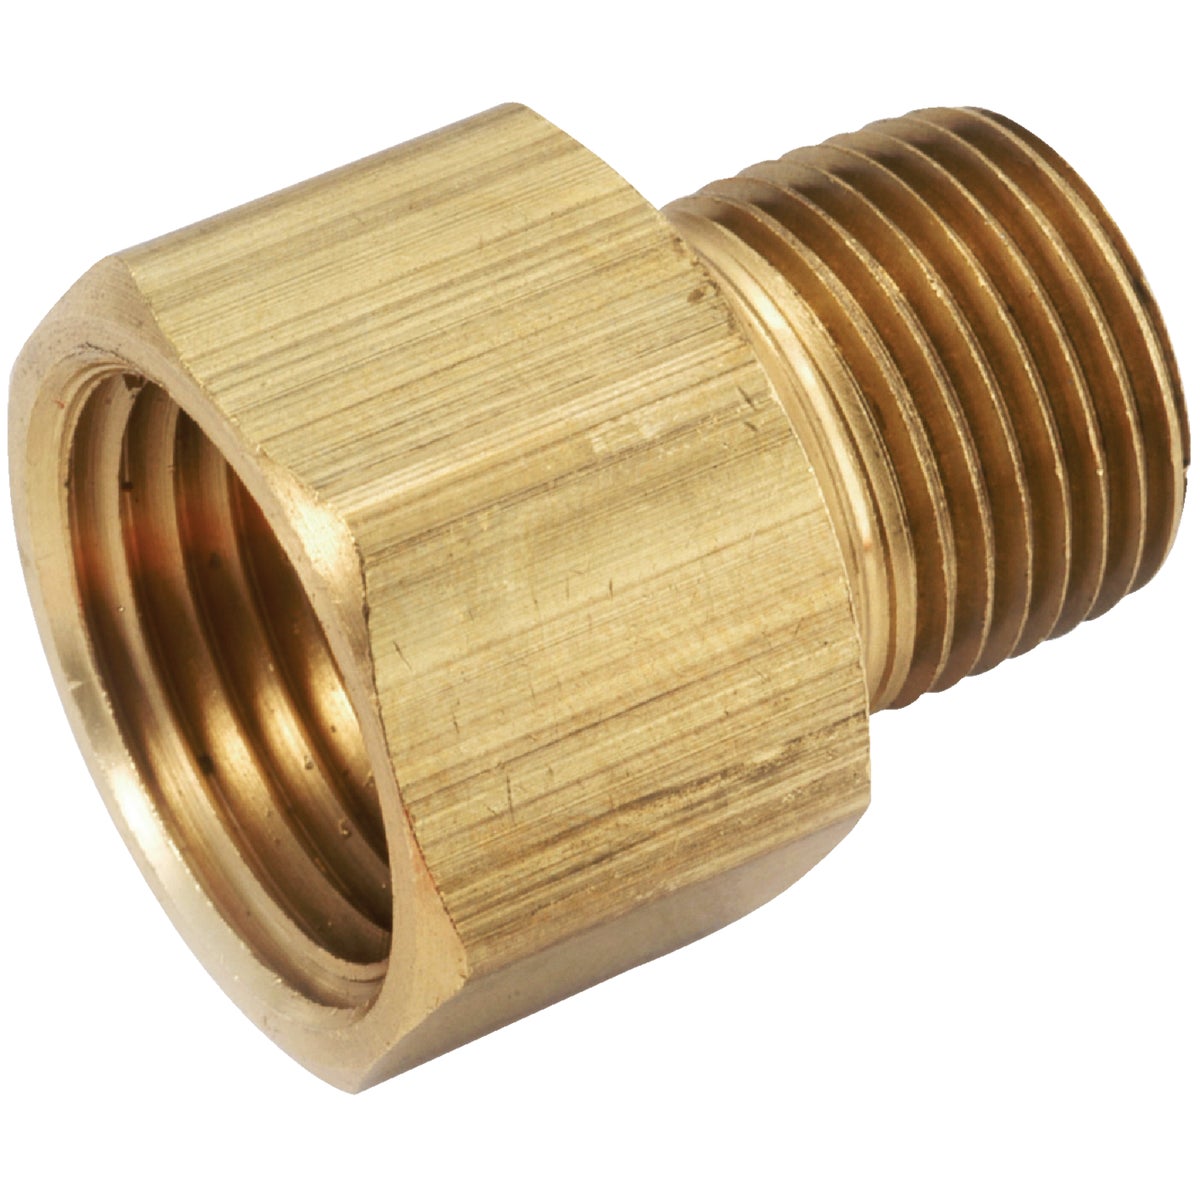 Anderson Metals 1/2 In. FPT x 3/8 In. MPT Brass Adapter